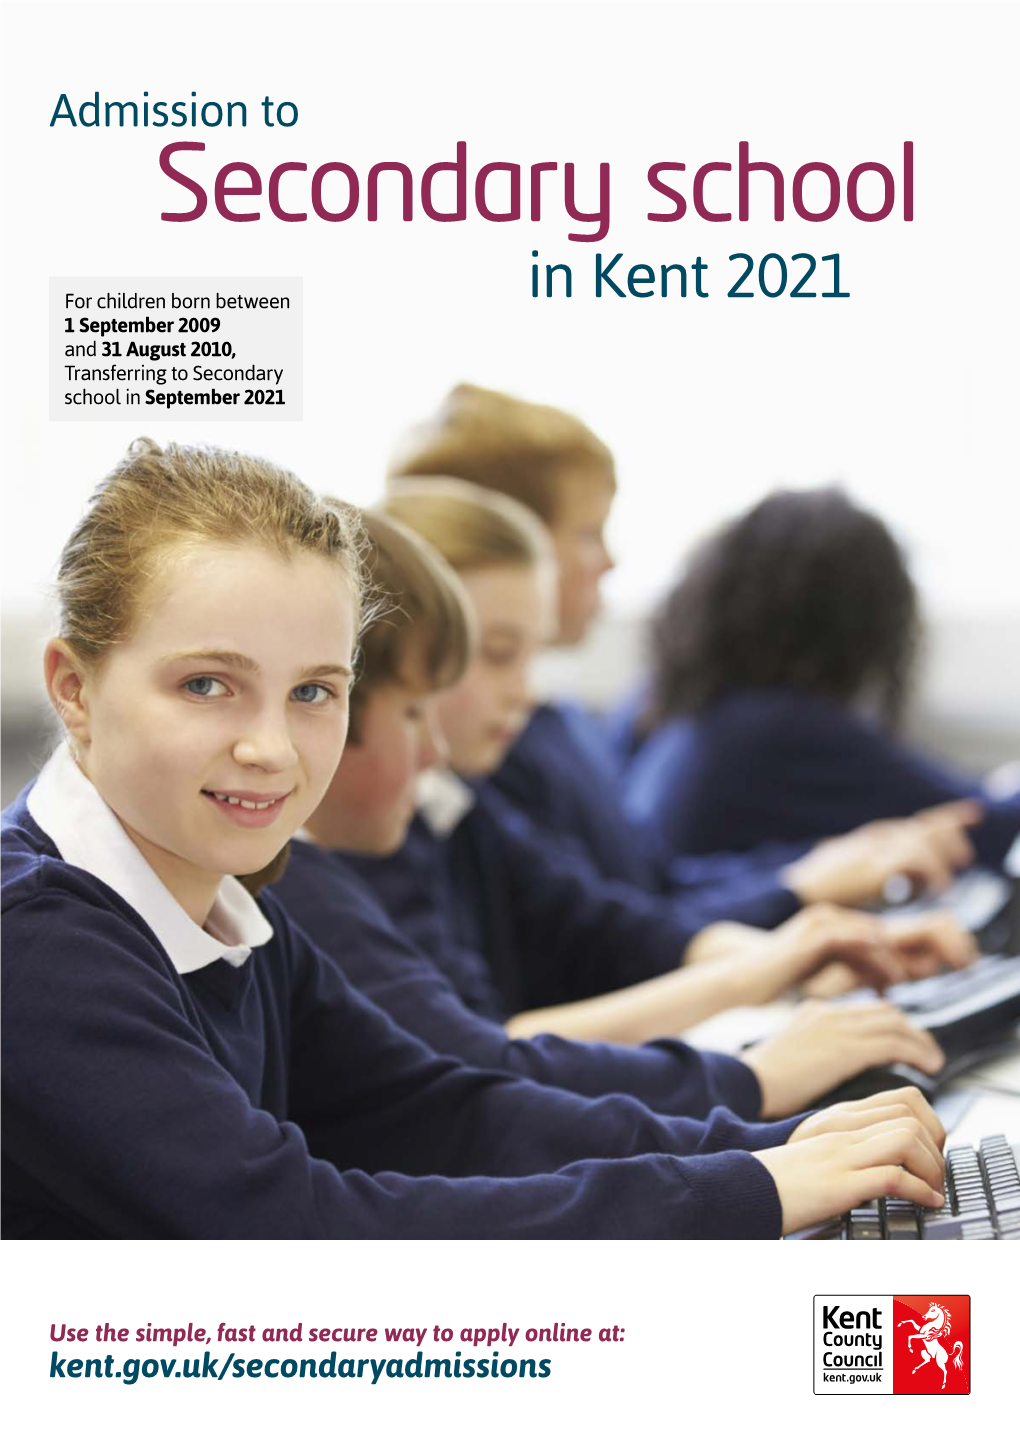 Admission to Secondary School in Kent 2021